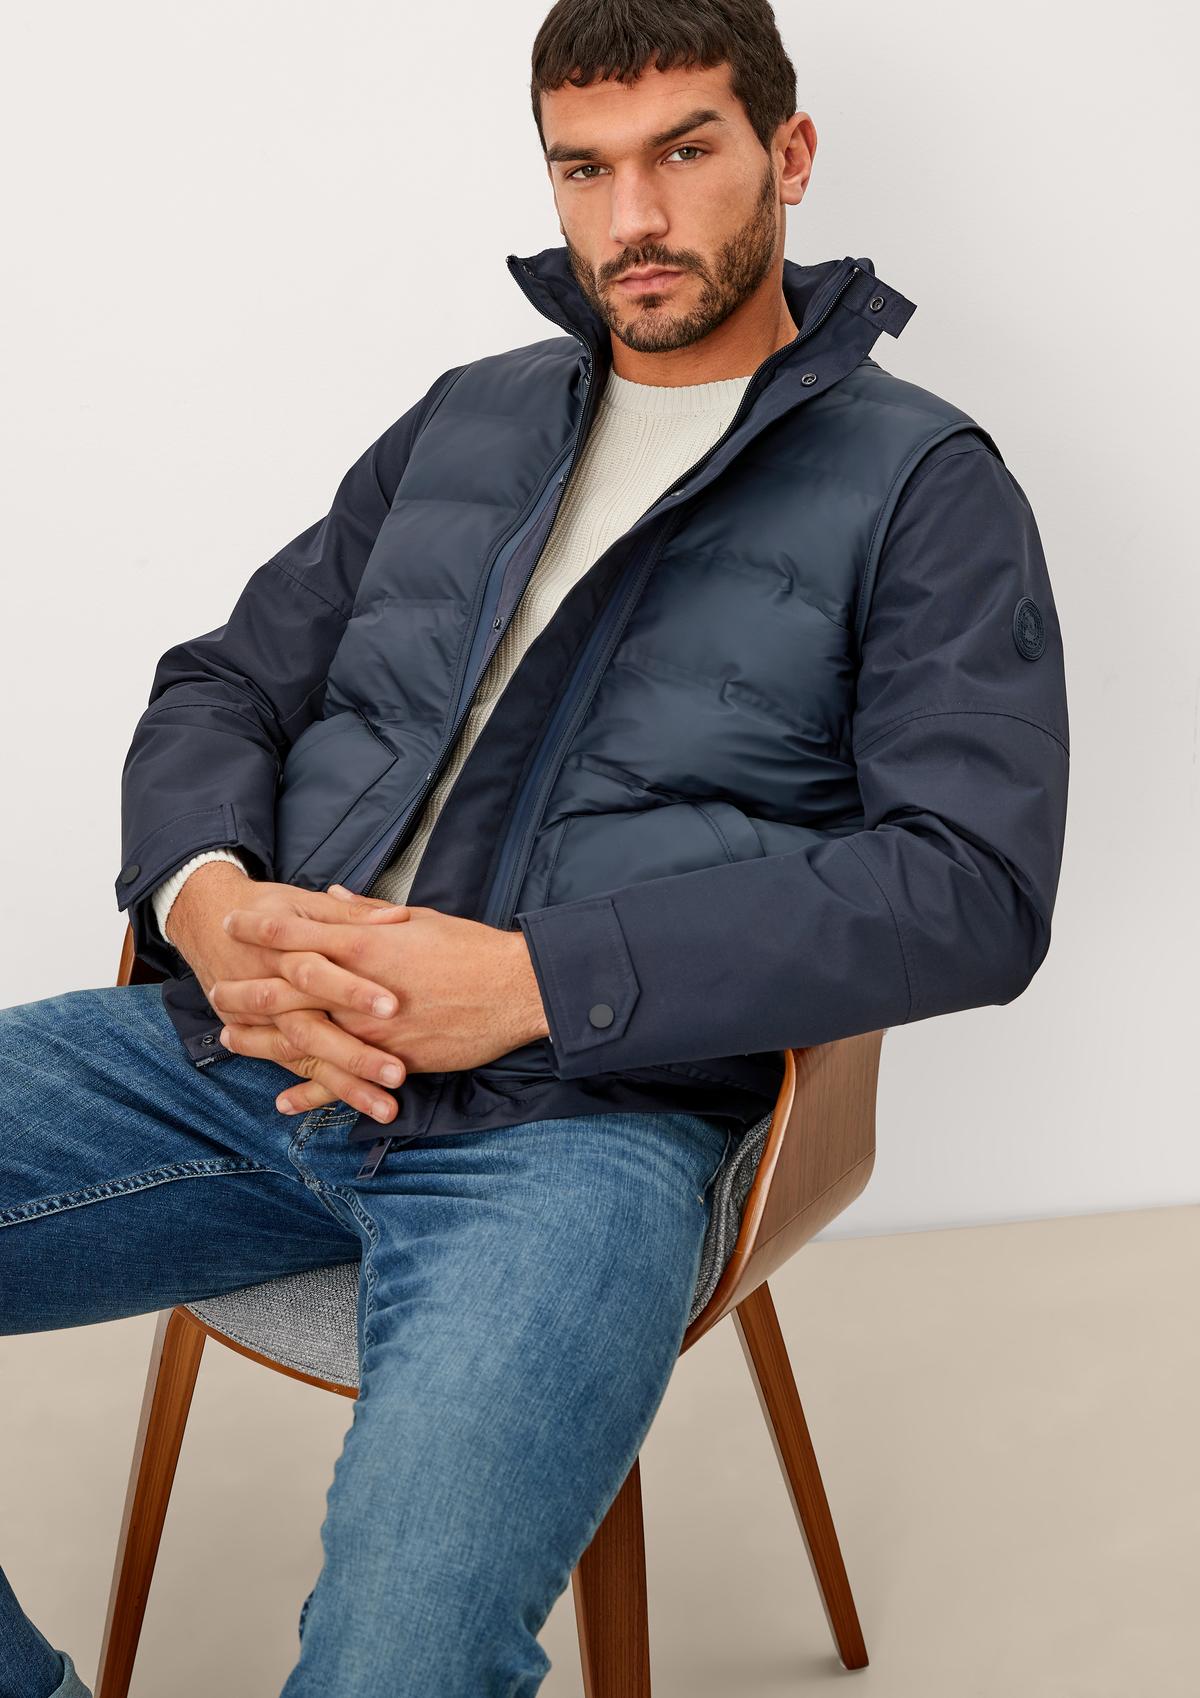 s.Oliver Jacket with a detachable body warmer